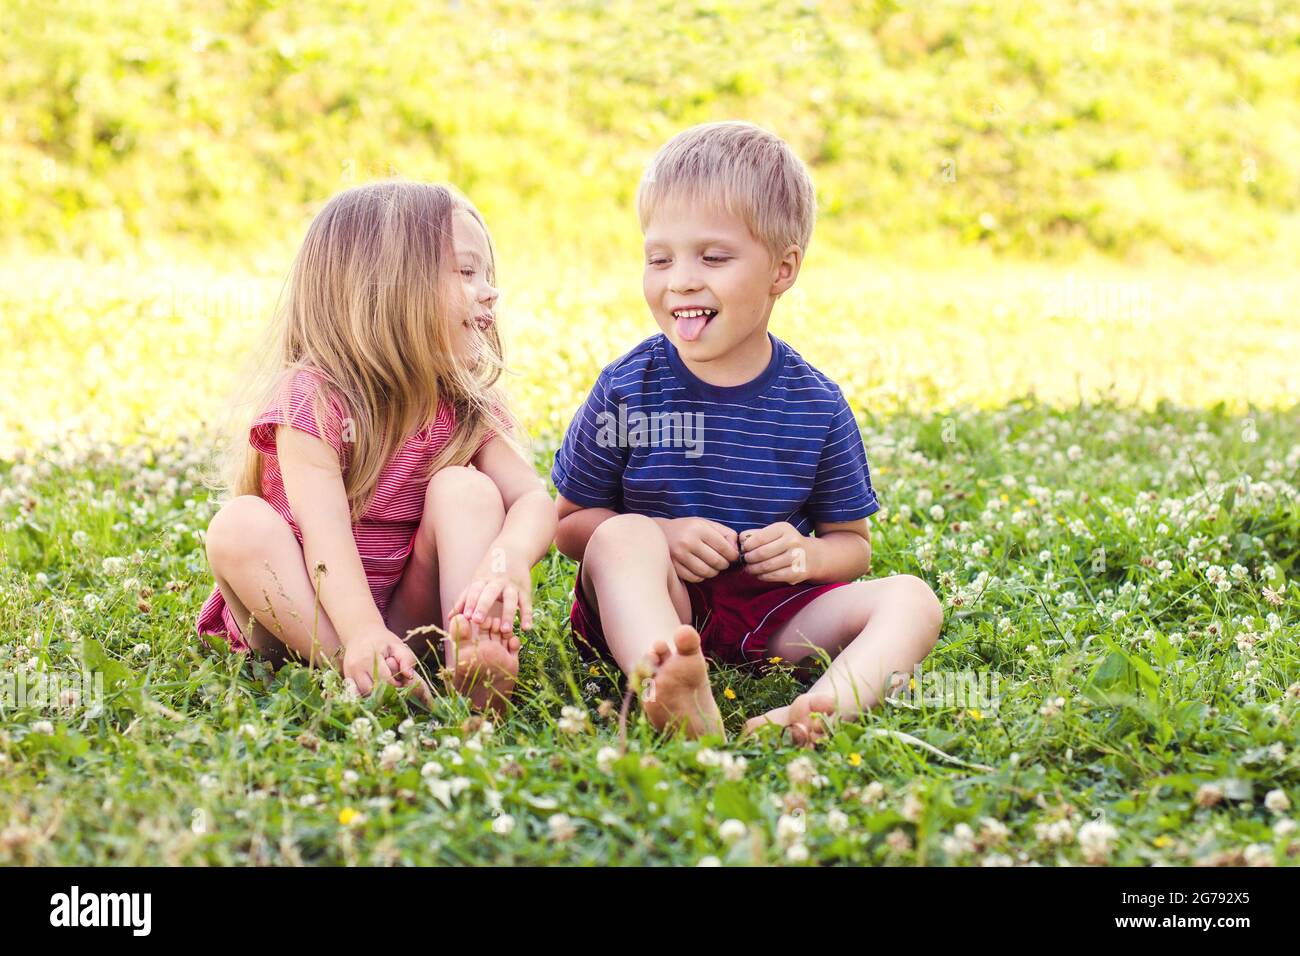 A blonde-haired boy and a girl are sitting on a green grass lawn and playing with each other. Happy childhood, fun vacation Stock Photo